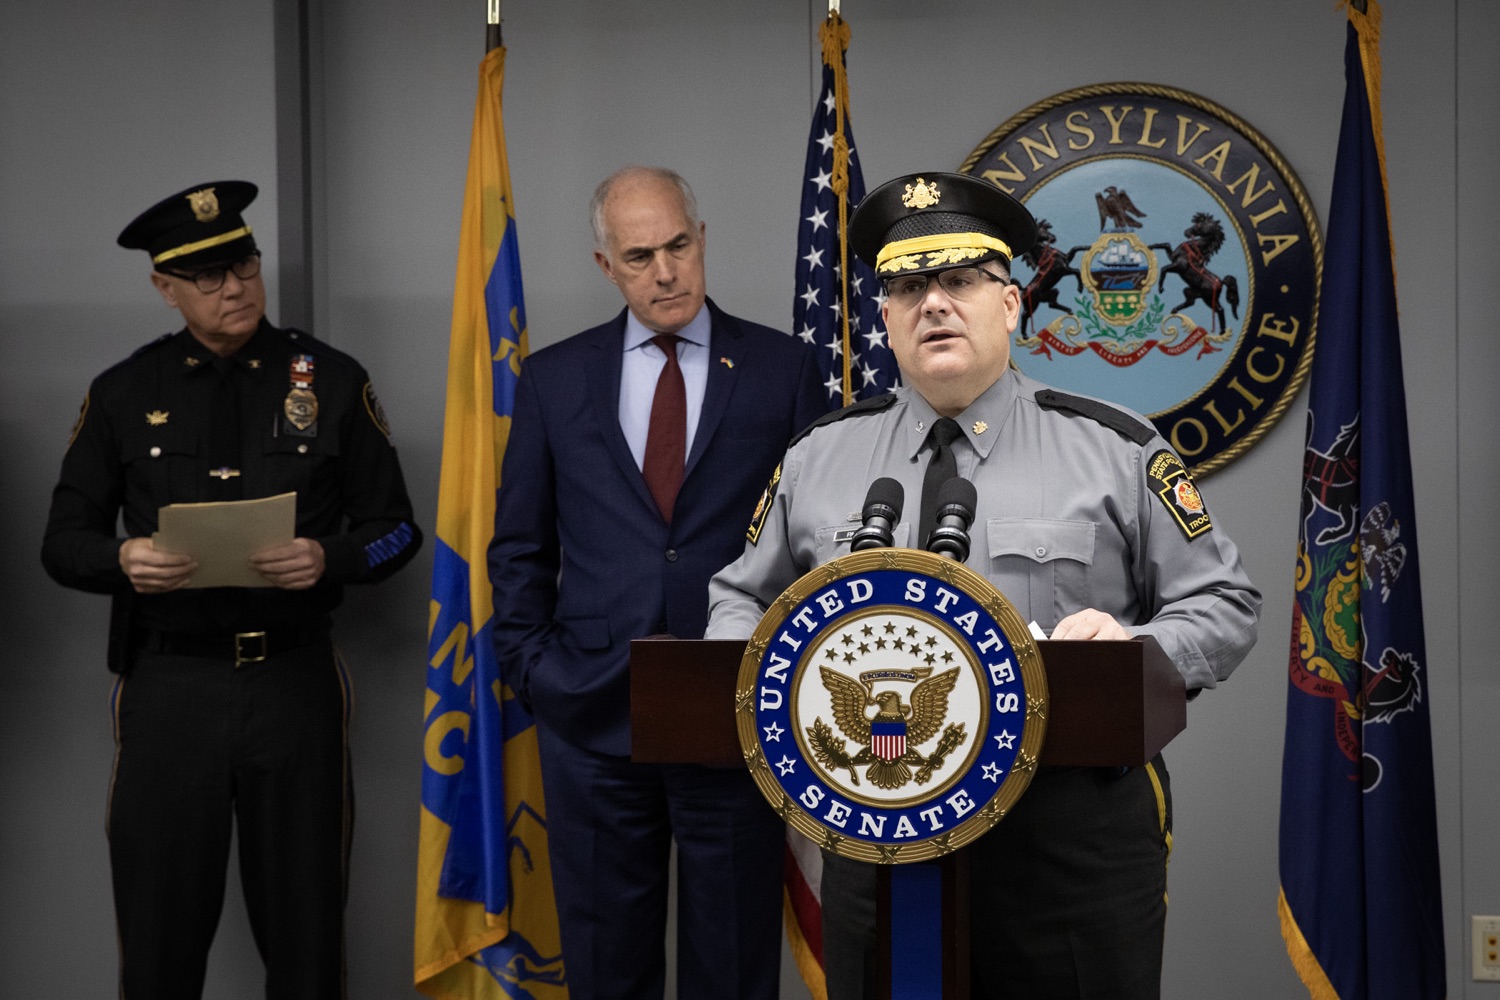 Senator Bob Casey visited Pennsylvania State Police Headquarters to discuss his proposed Stop Fentanyl at the Border Act. Pictured here is Harrisburg Colonel Paris delivering remarks during the event. Harrisburg, Pennsylvania.<br><a href="https://filesource.amperwave.net/commonwealthofpa/photo/24347_psp_stopFentanyl_JP_12.jpg" target="_blank">⇣ Download Photo</a>